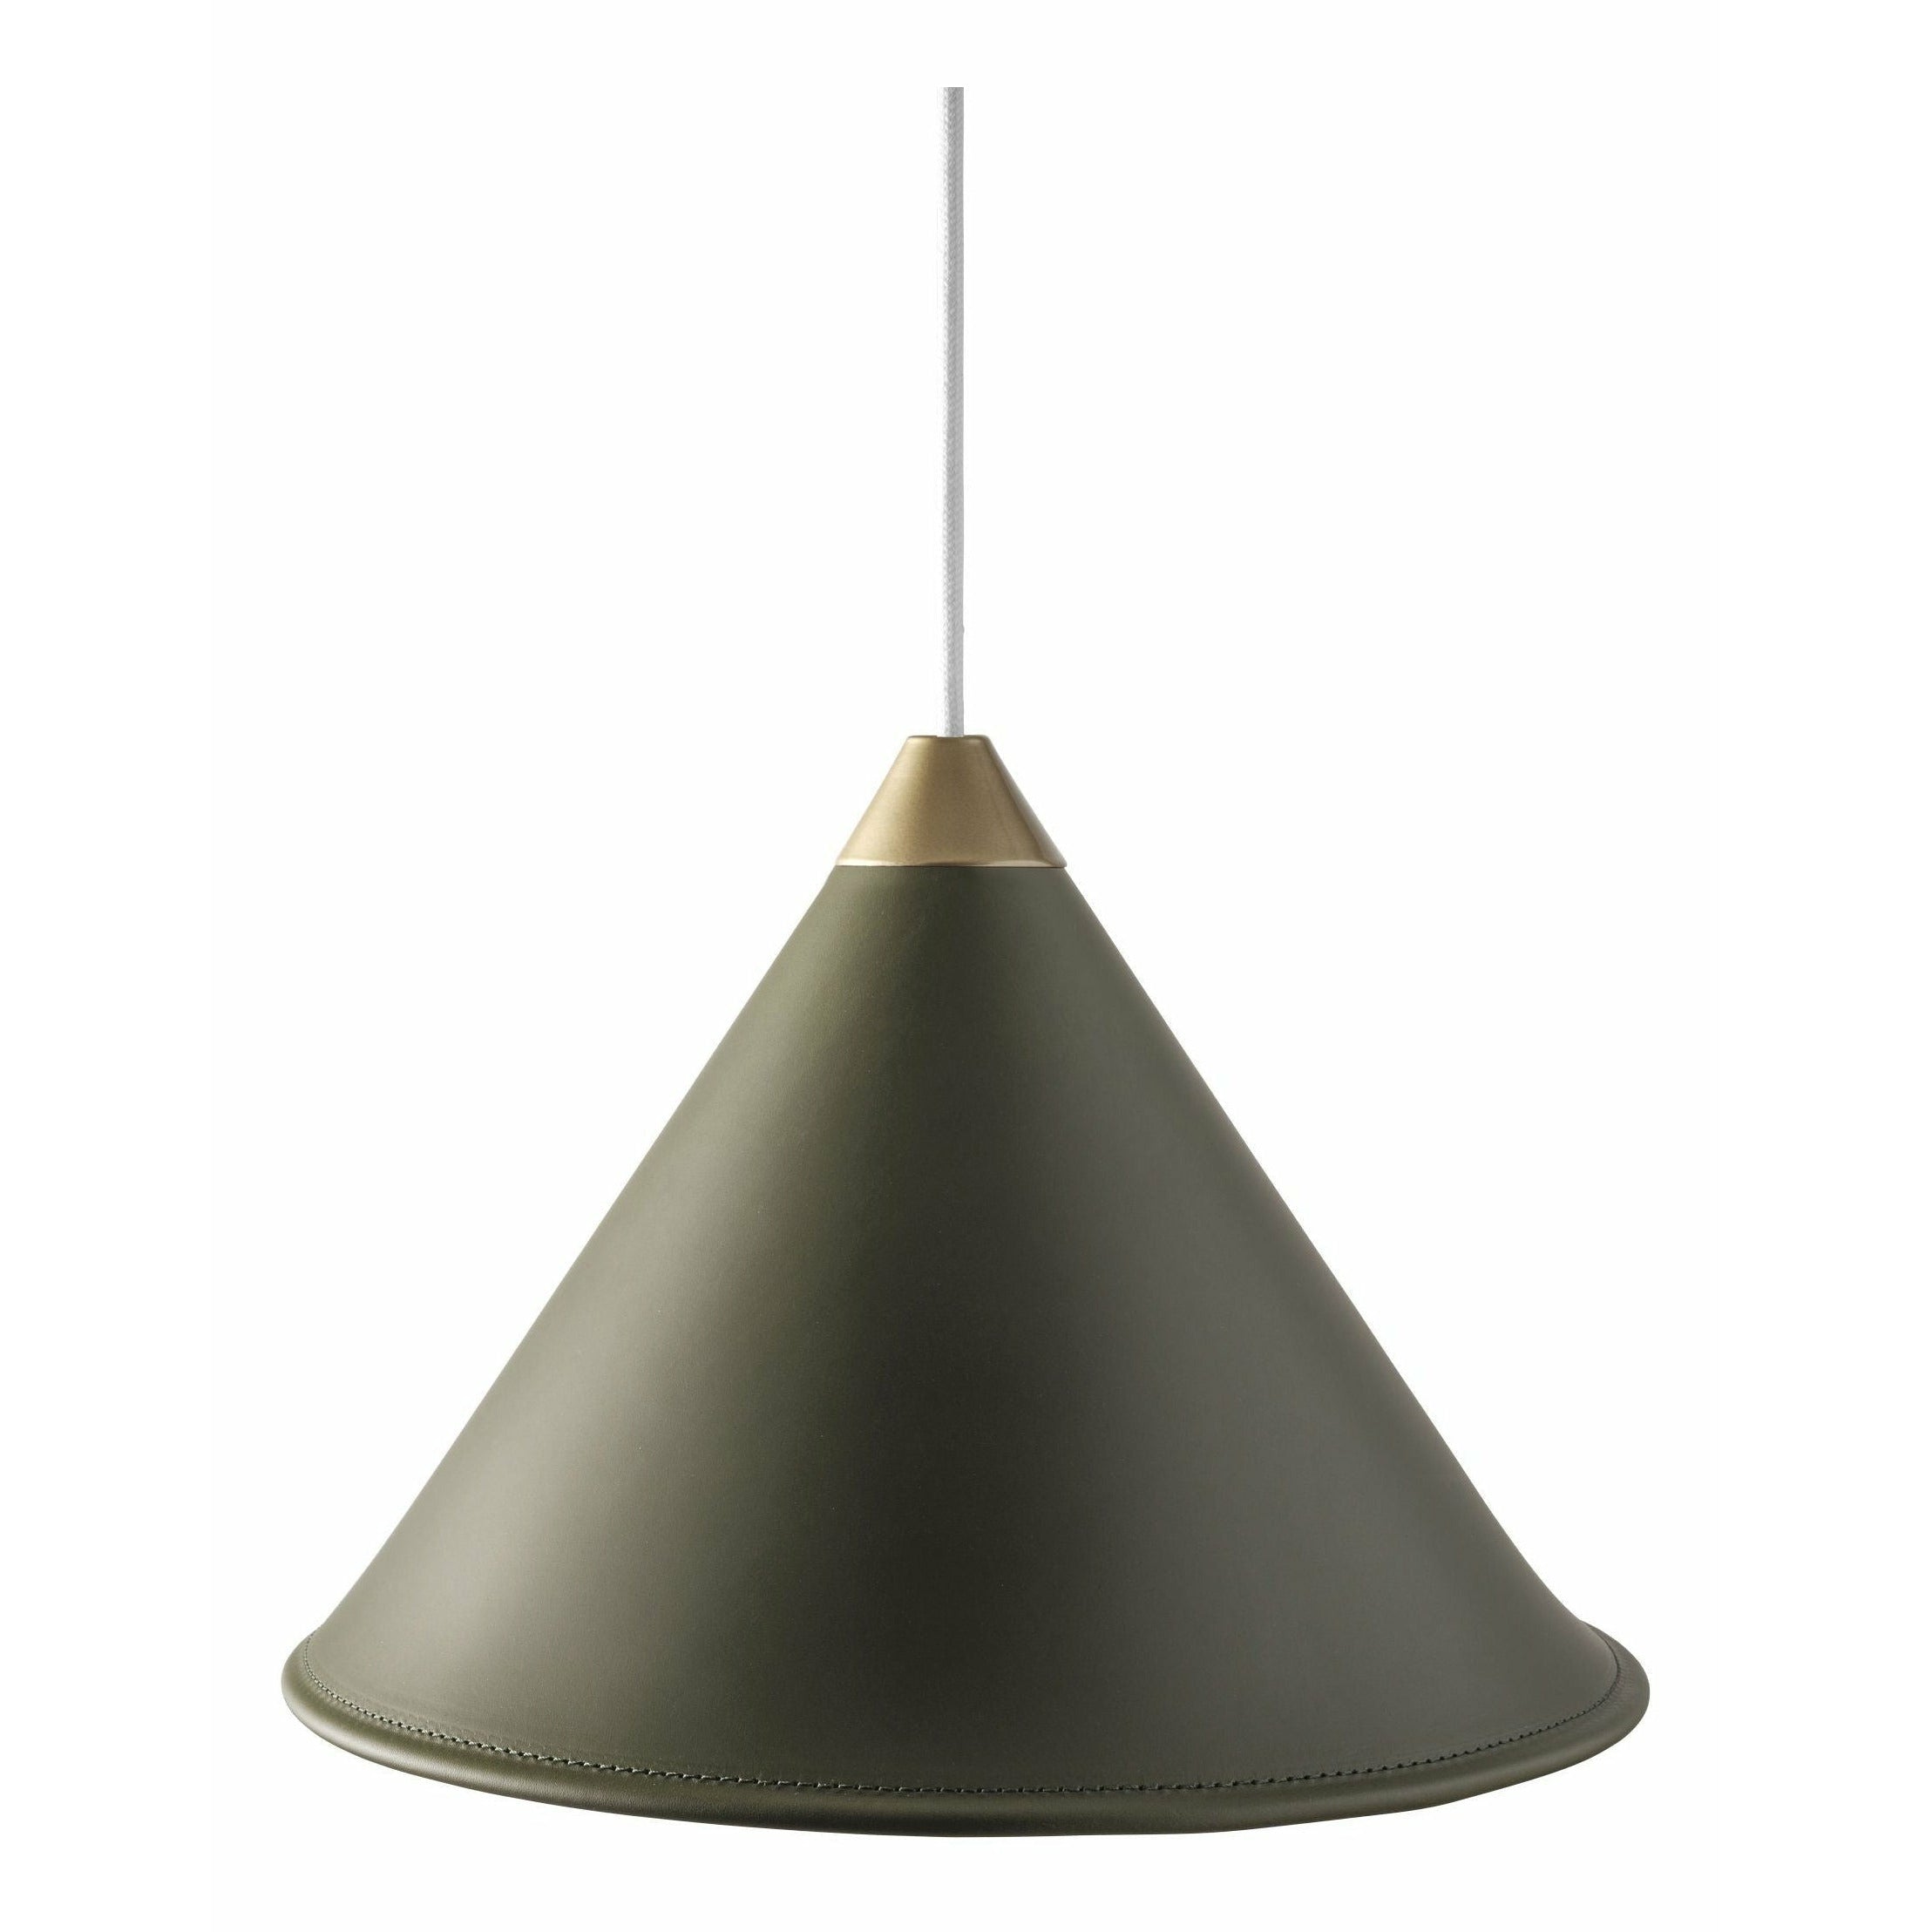 Cuero Namibia Pendant ø 45 Cm, Grass Green/Brass With White Cable